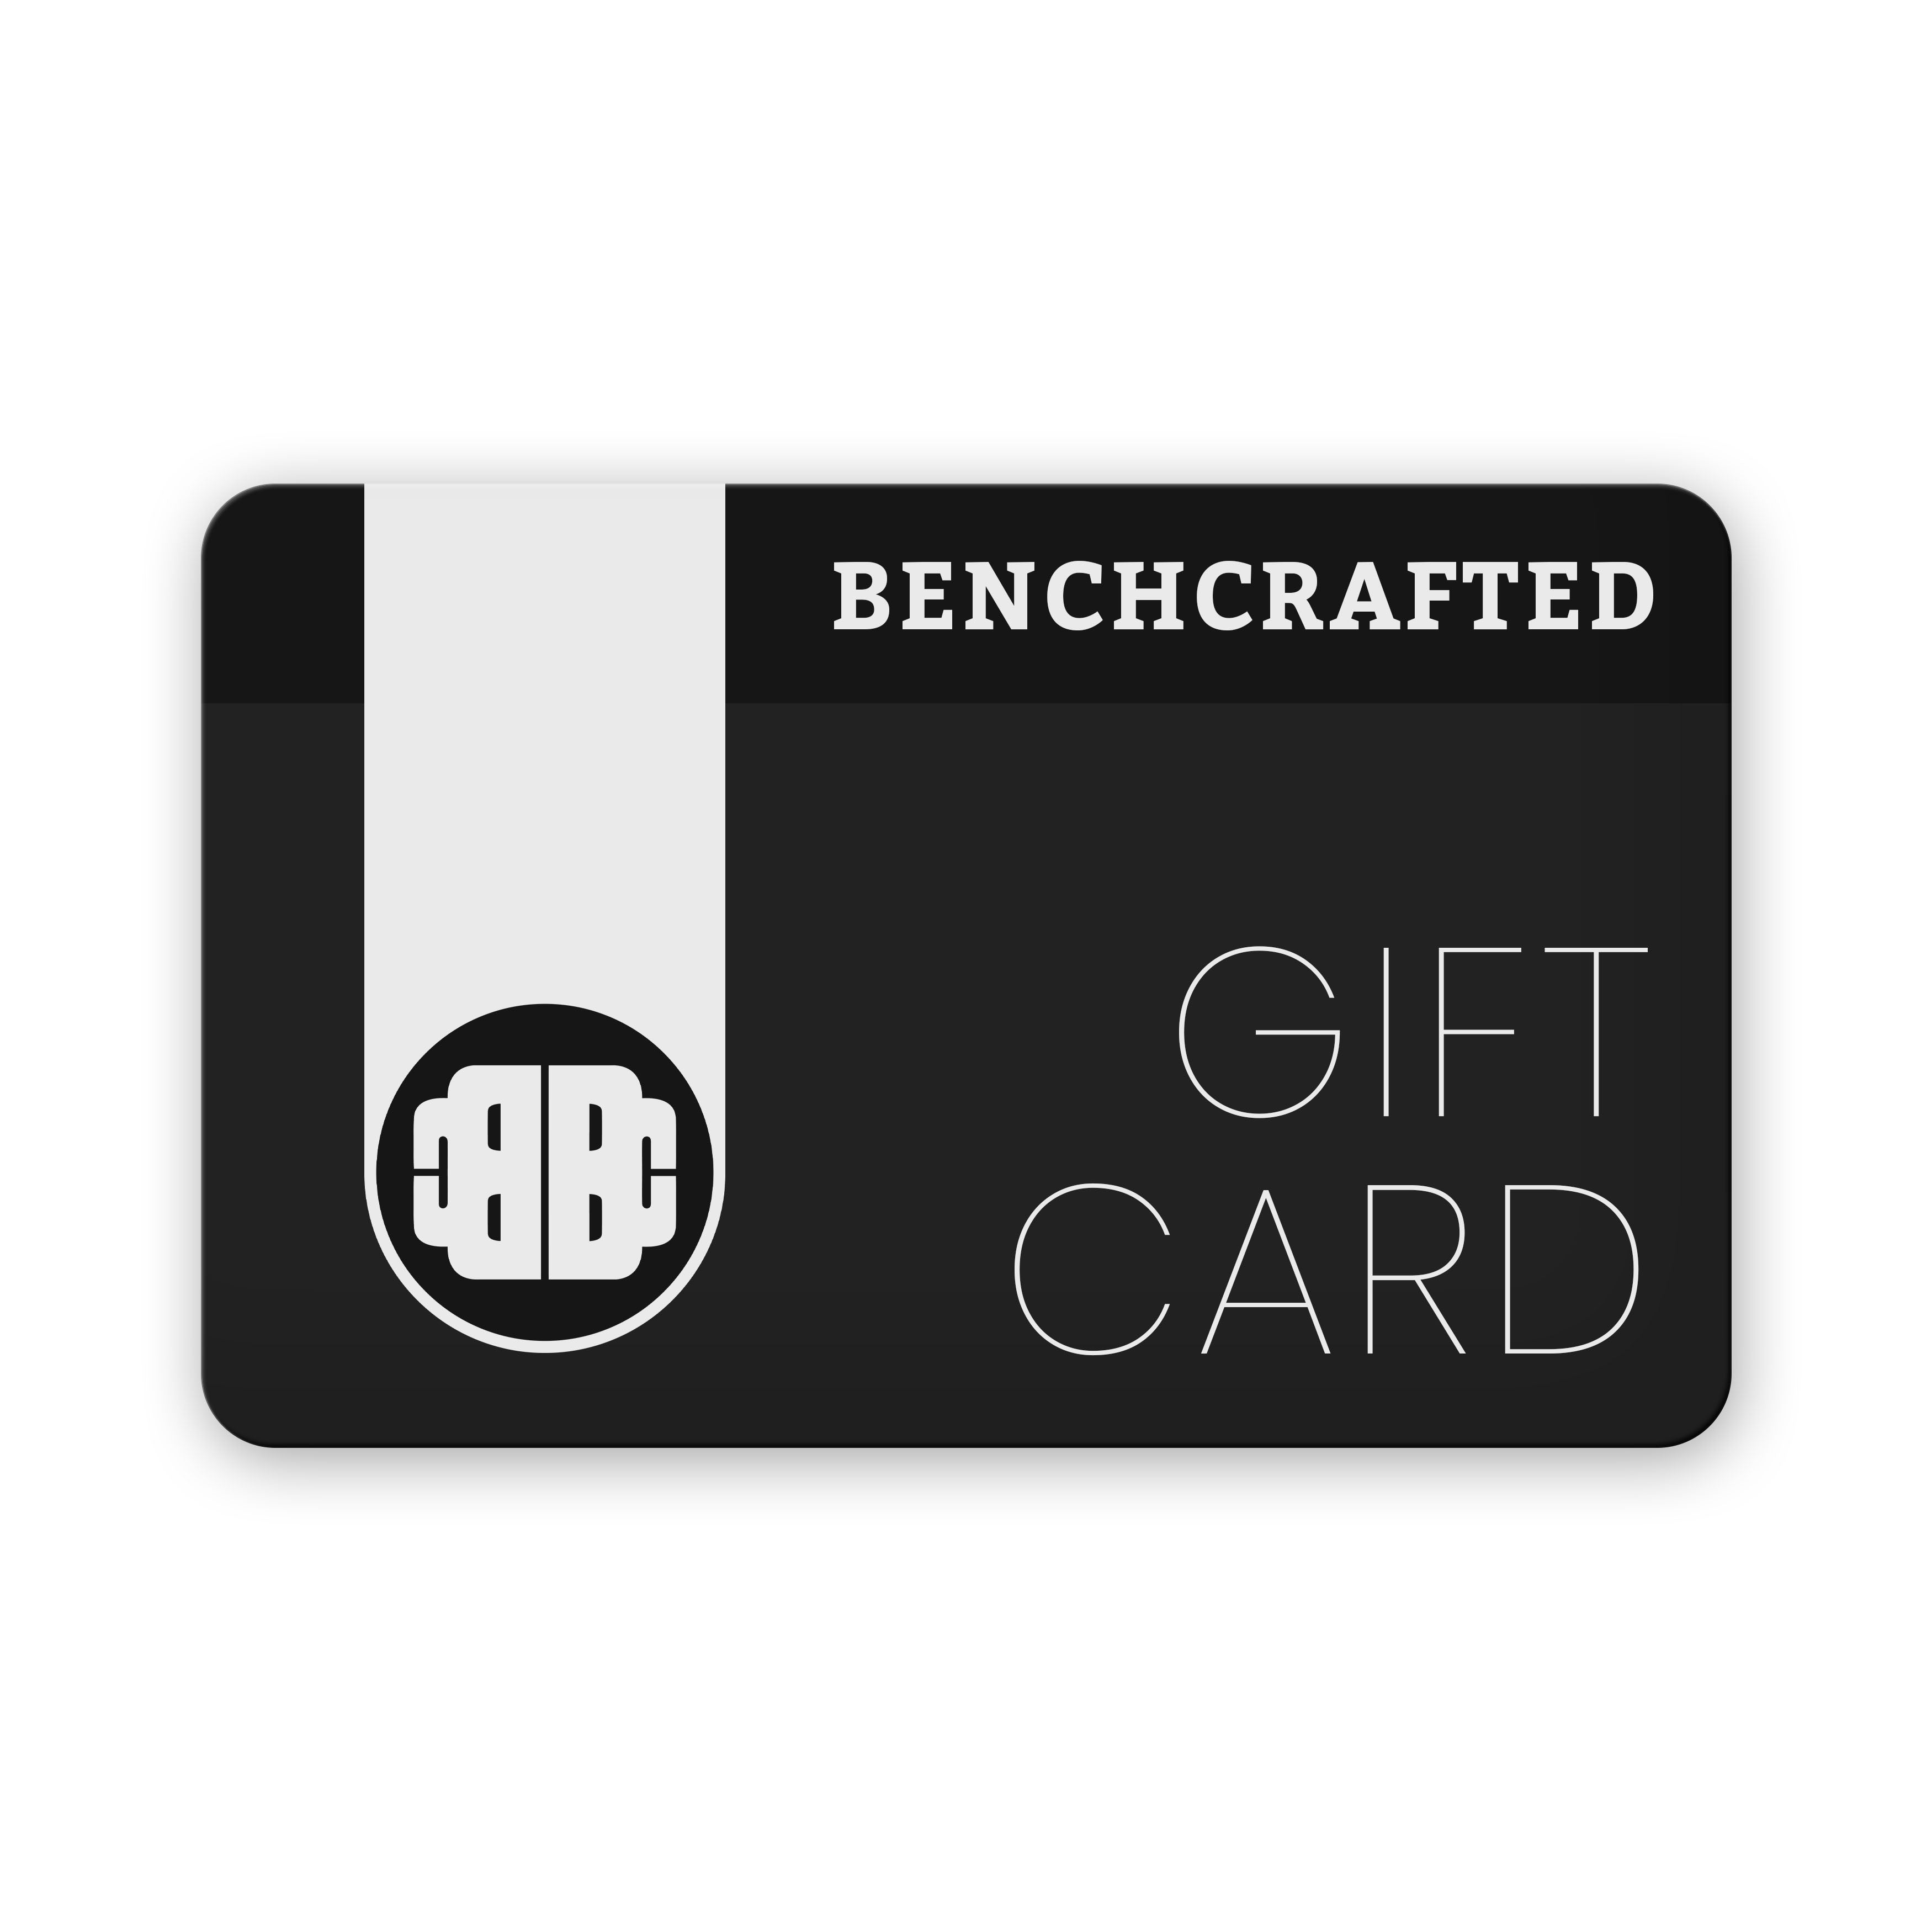 Benchcrafted Gift Card